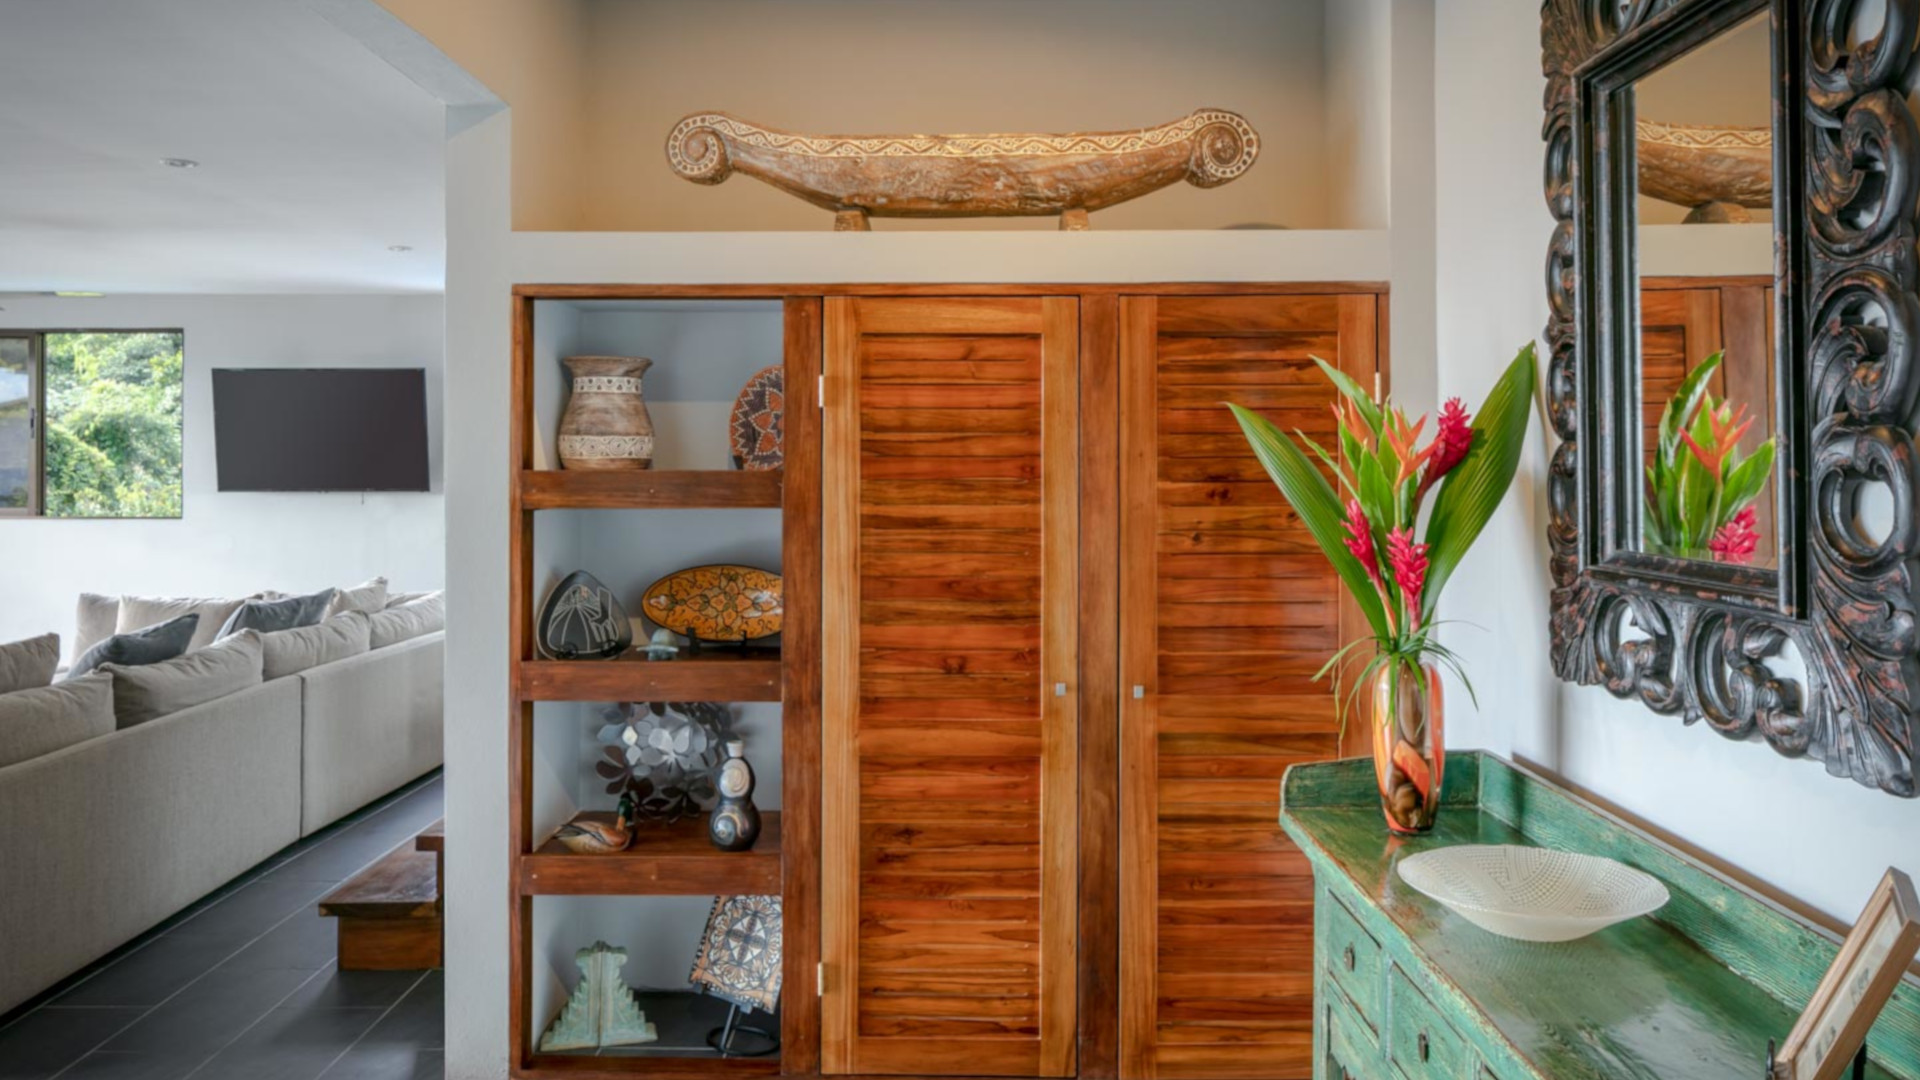 An extra closet and beautiful accessories greet you at the entrance to this villa rental in Manuel Antonio.